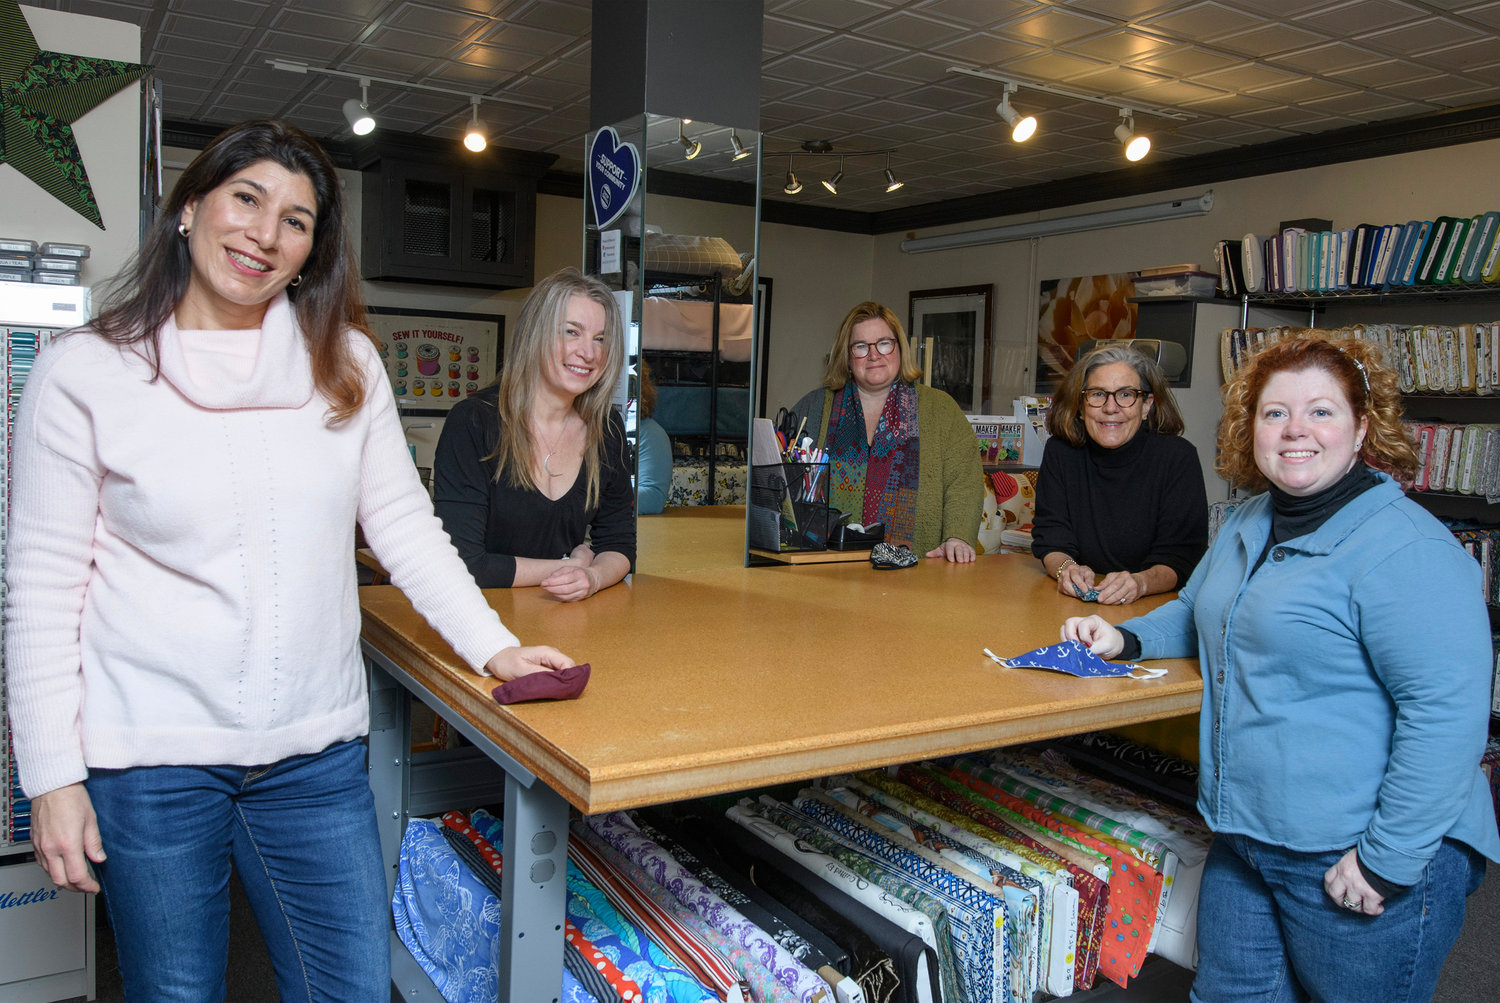 L to R: Tanja Carroll, Wickford Way Magazine; Amelia Smith, Different Drummer; Bethany Mazza, Green Ink; 
Suzanne Mancini, the-sew-op; and Carrie Kolb, Wickford Wealth Management